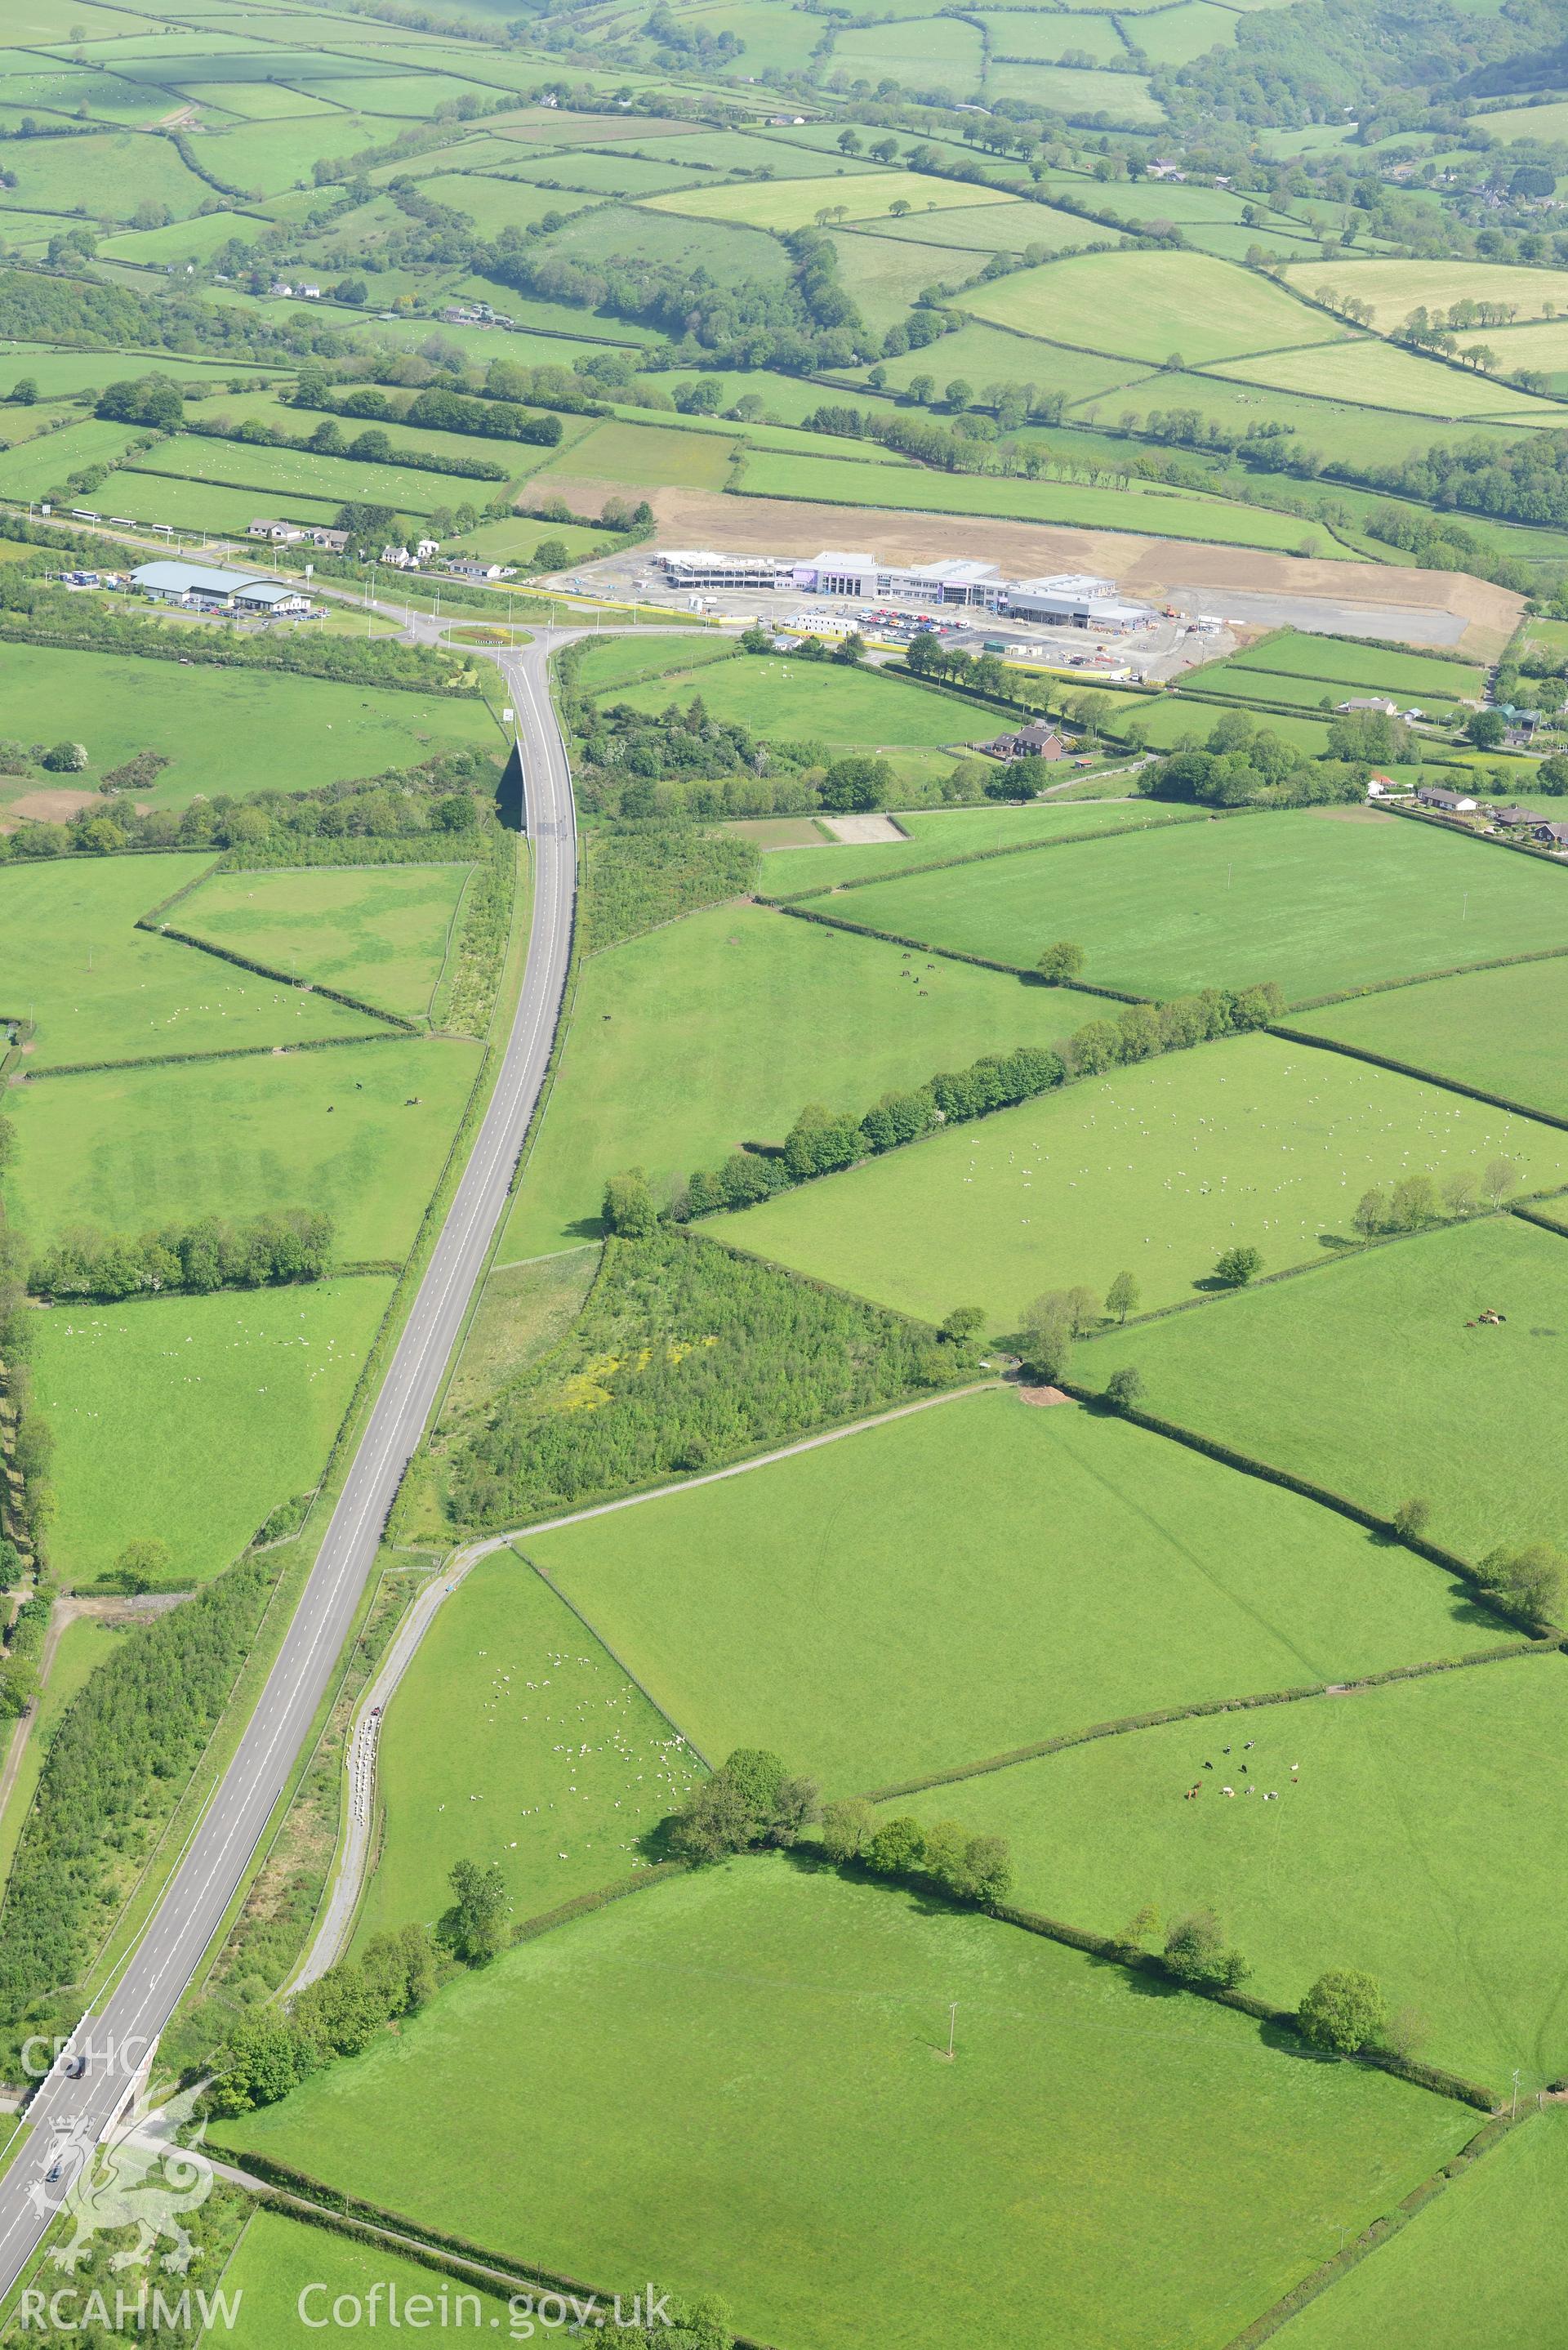 Ysgol Bro Teifi and the Llandysul bypass. Oblique aerial photograph taken during the Royal Commission's programme of archaeological aerial reconnaissance by Toby Driver on 3rd June 2015.